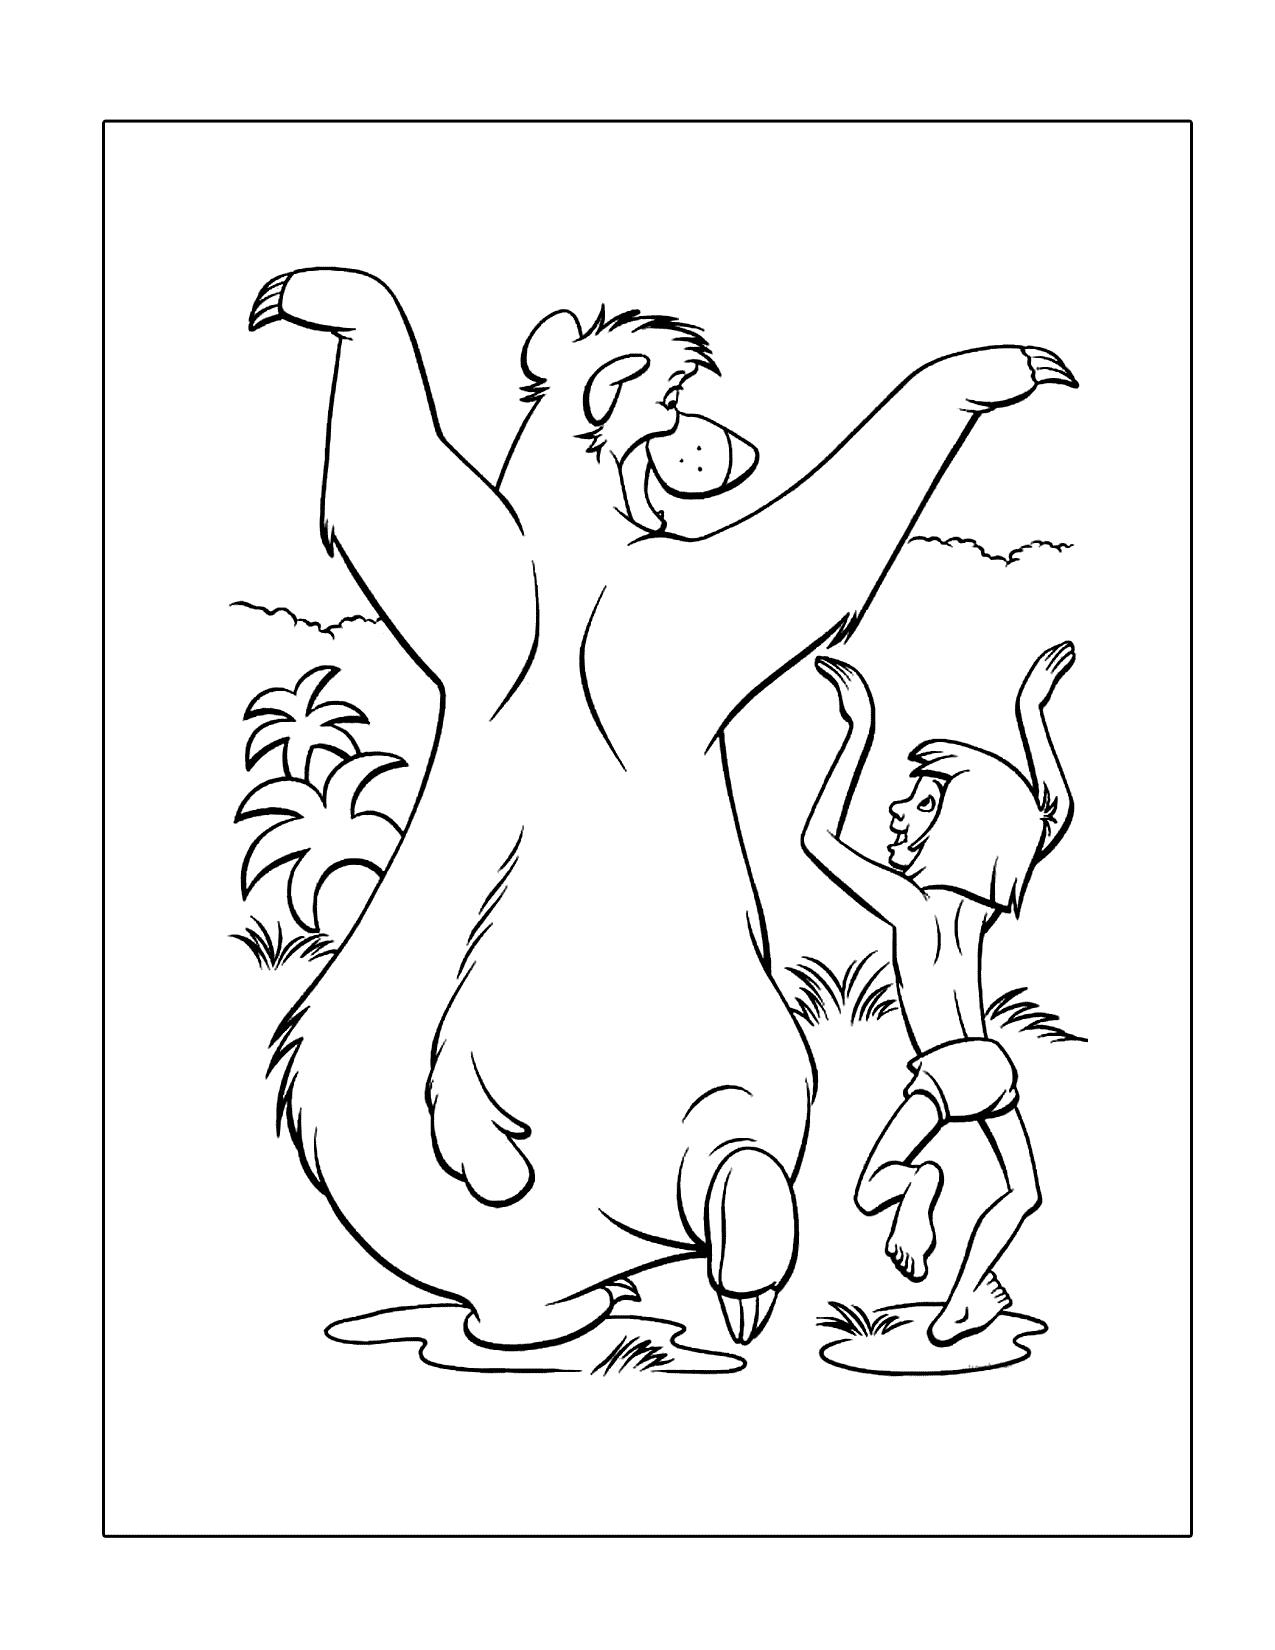 Jungle Book Bare Necesseties Song Coloring Page